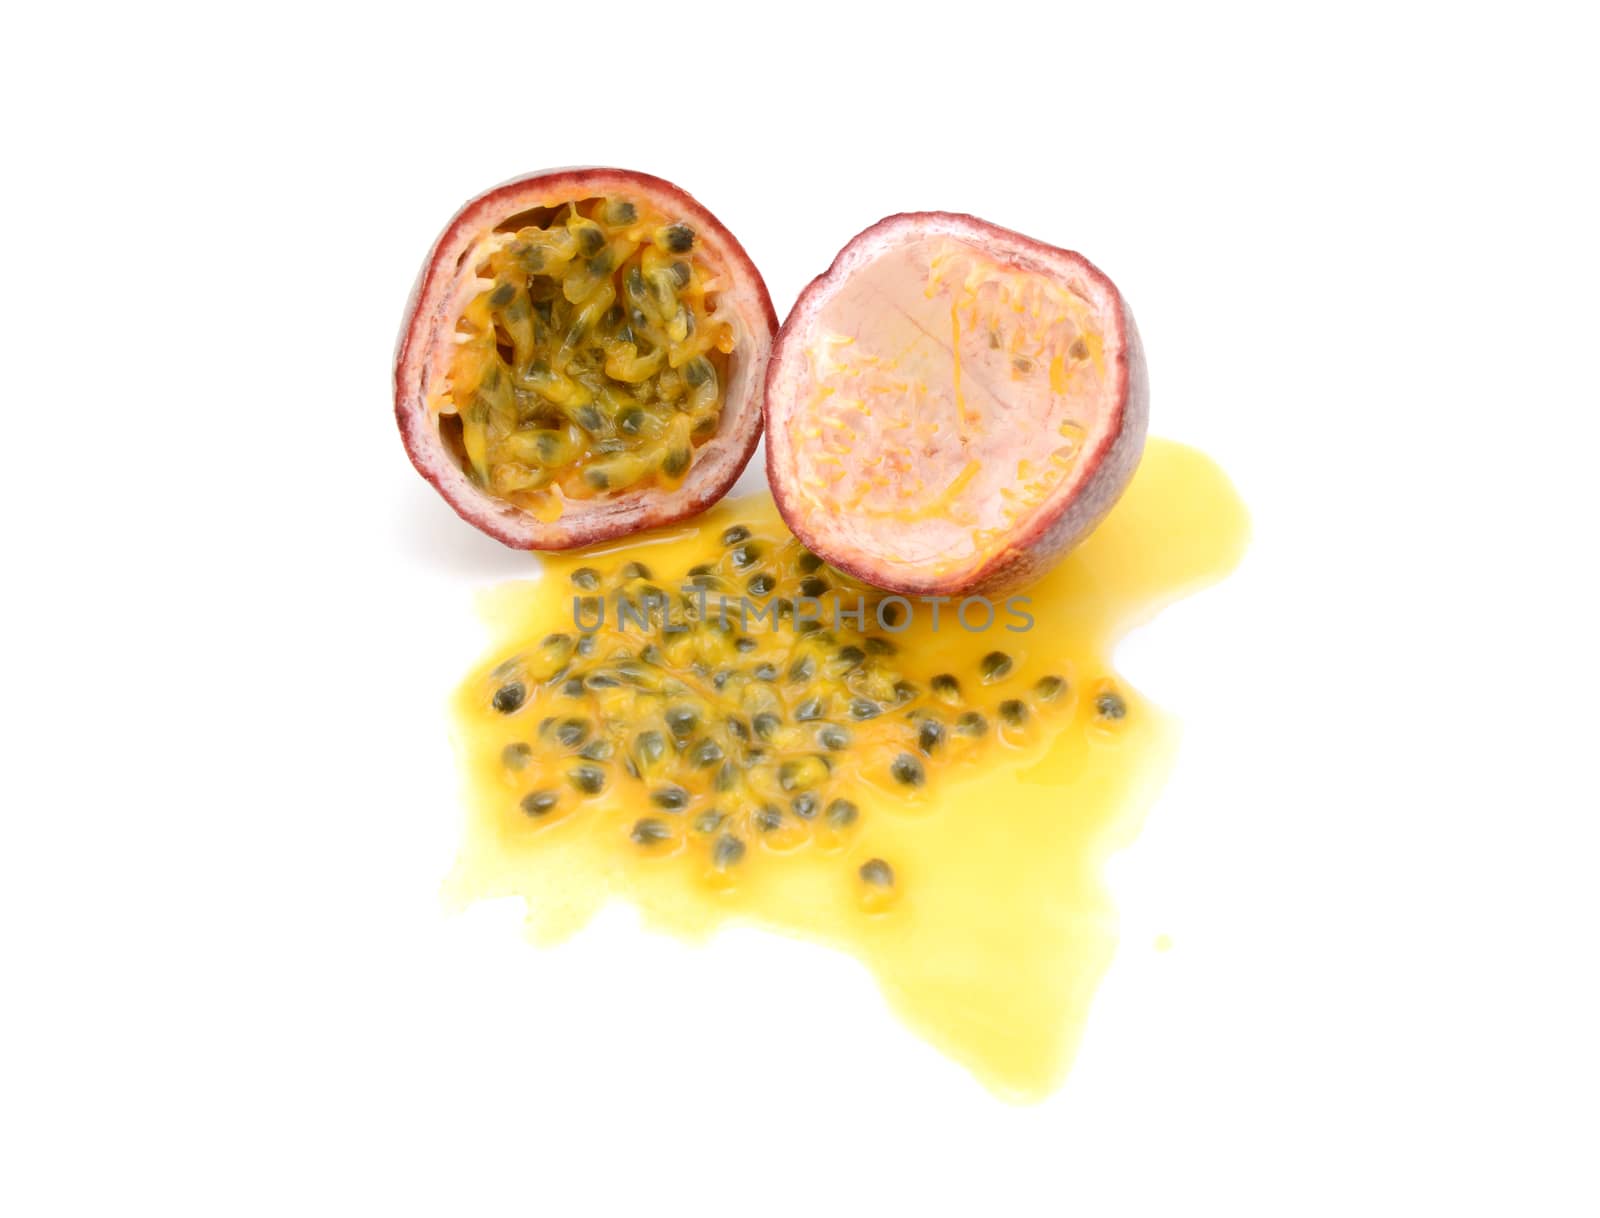 Half passion fruit with sweet pulp, seeds and juice spilled  by sarahdoow